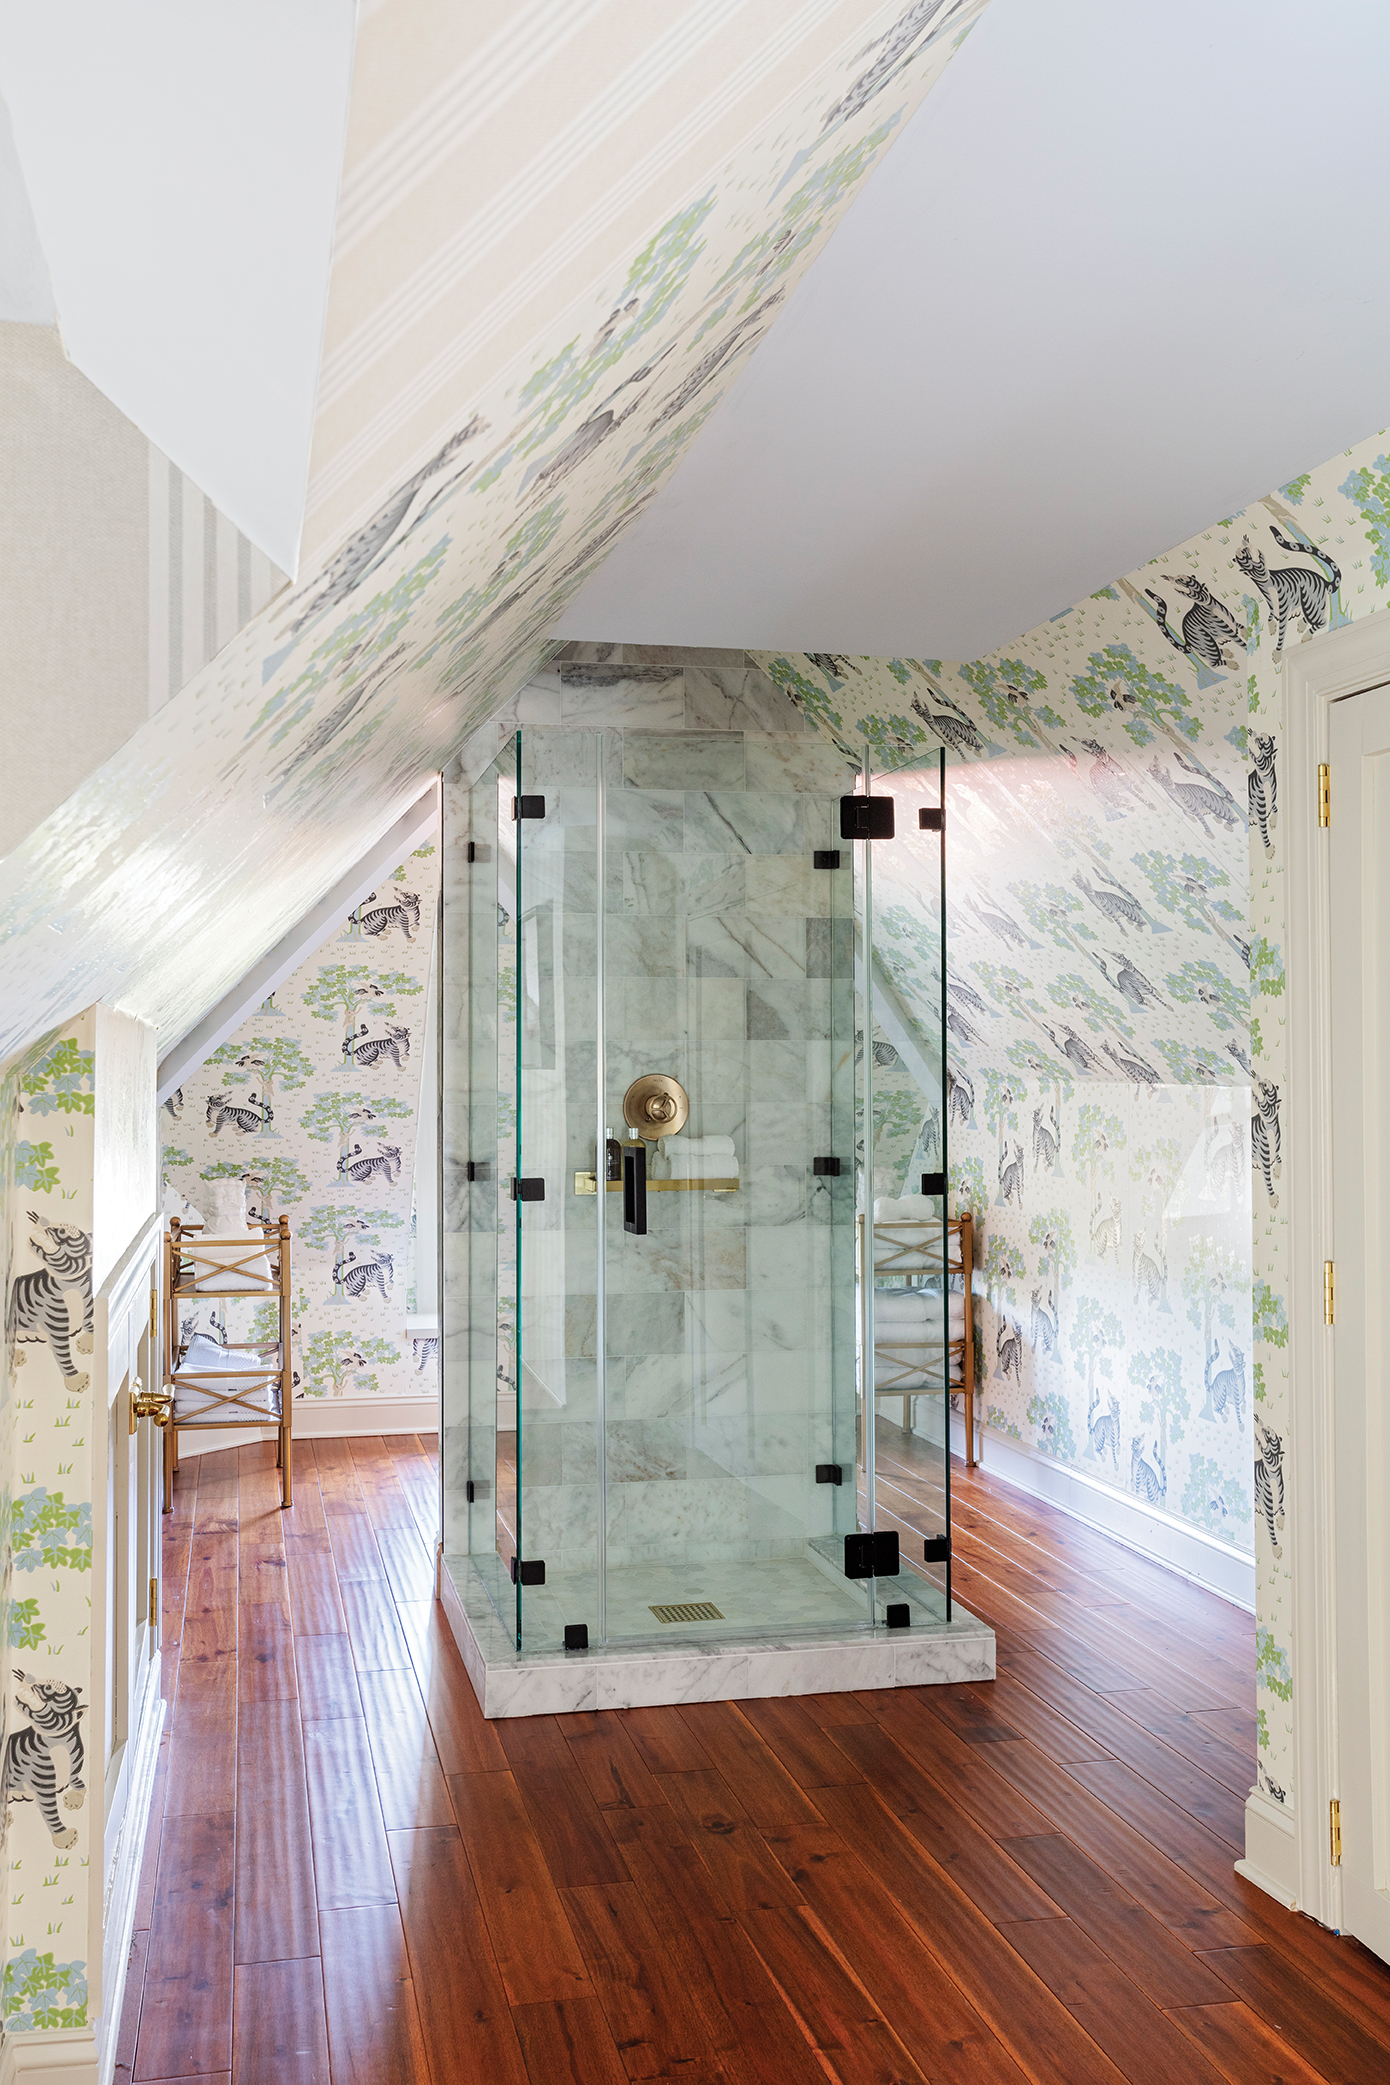 Thibaut wallpaper in animal prints (in the adjacent bath, right) keeps the mood fun.